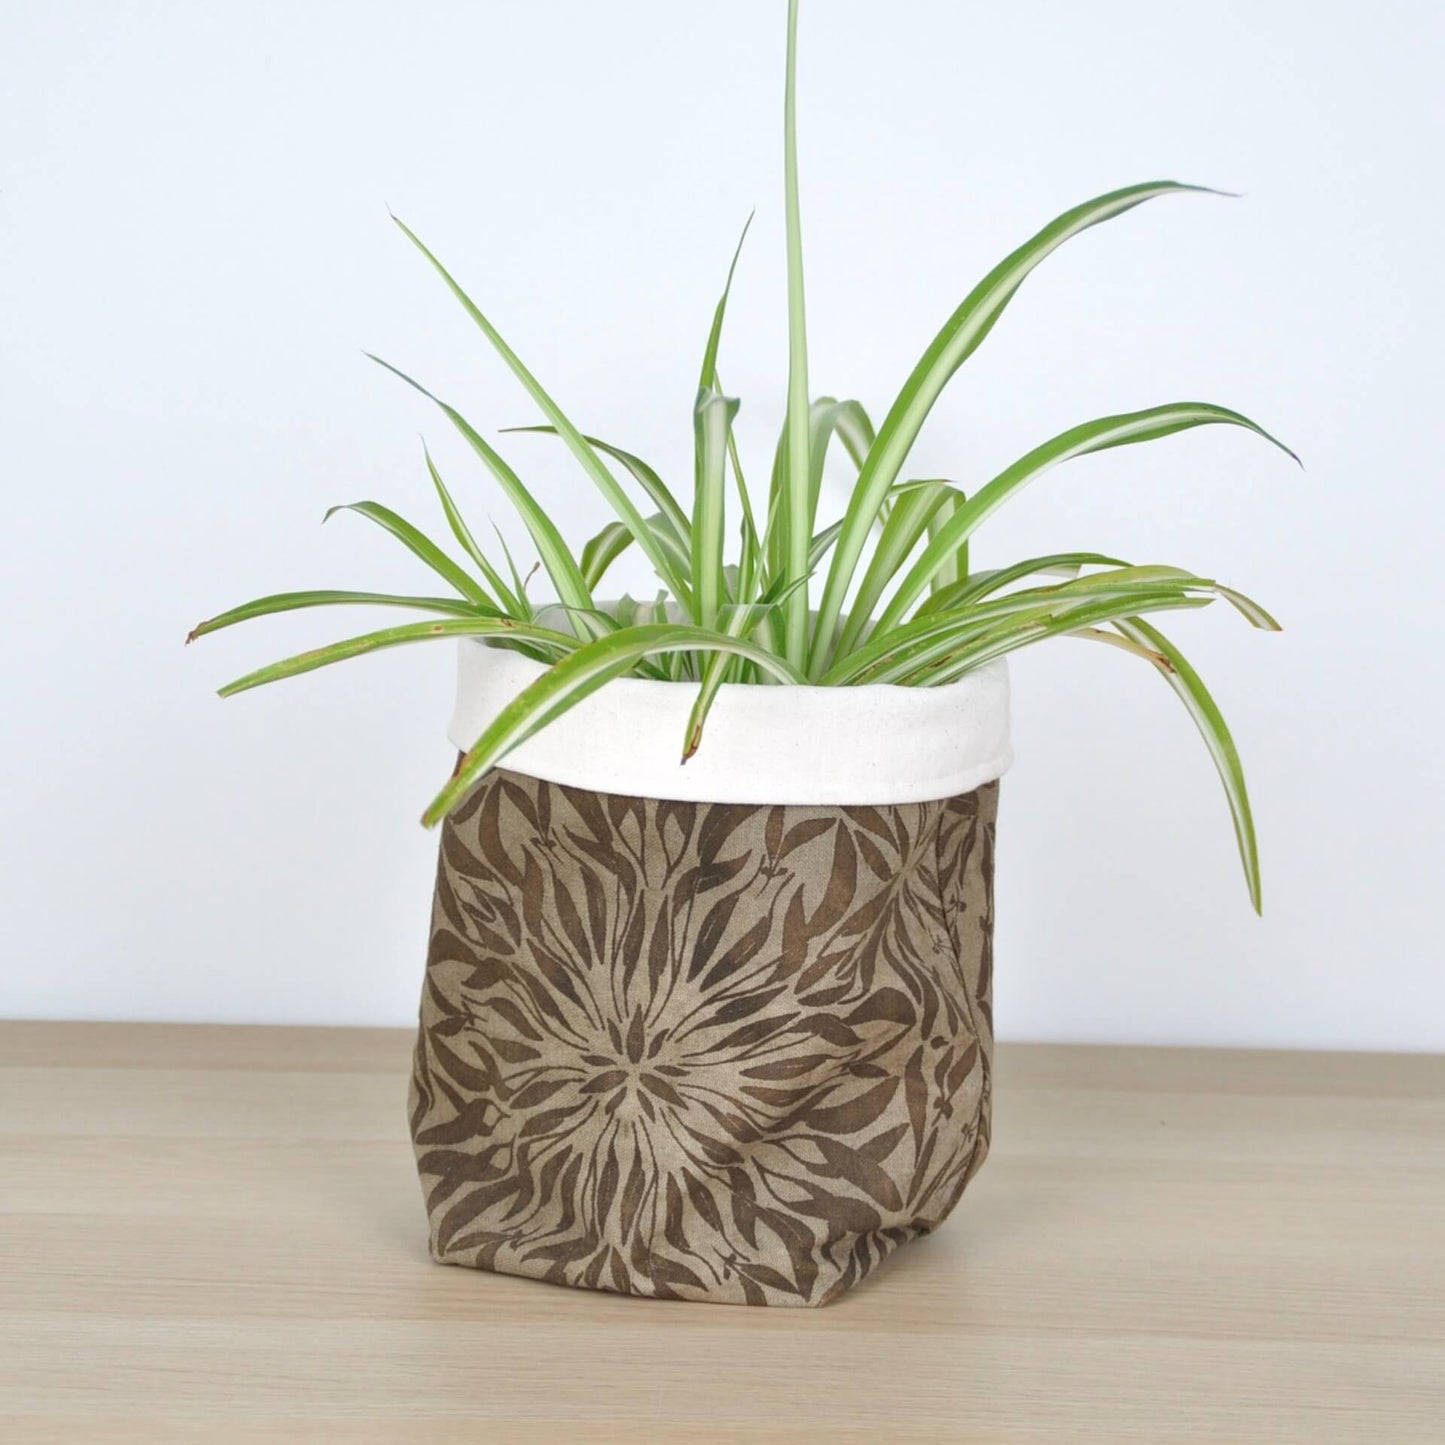 Prints By Nature Nicoli - Olive & Pebble Hand-printed Plant Pot Cover - Large (Various Designs)